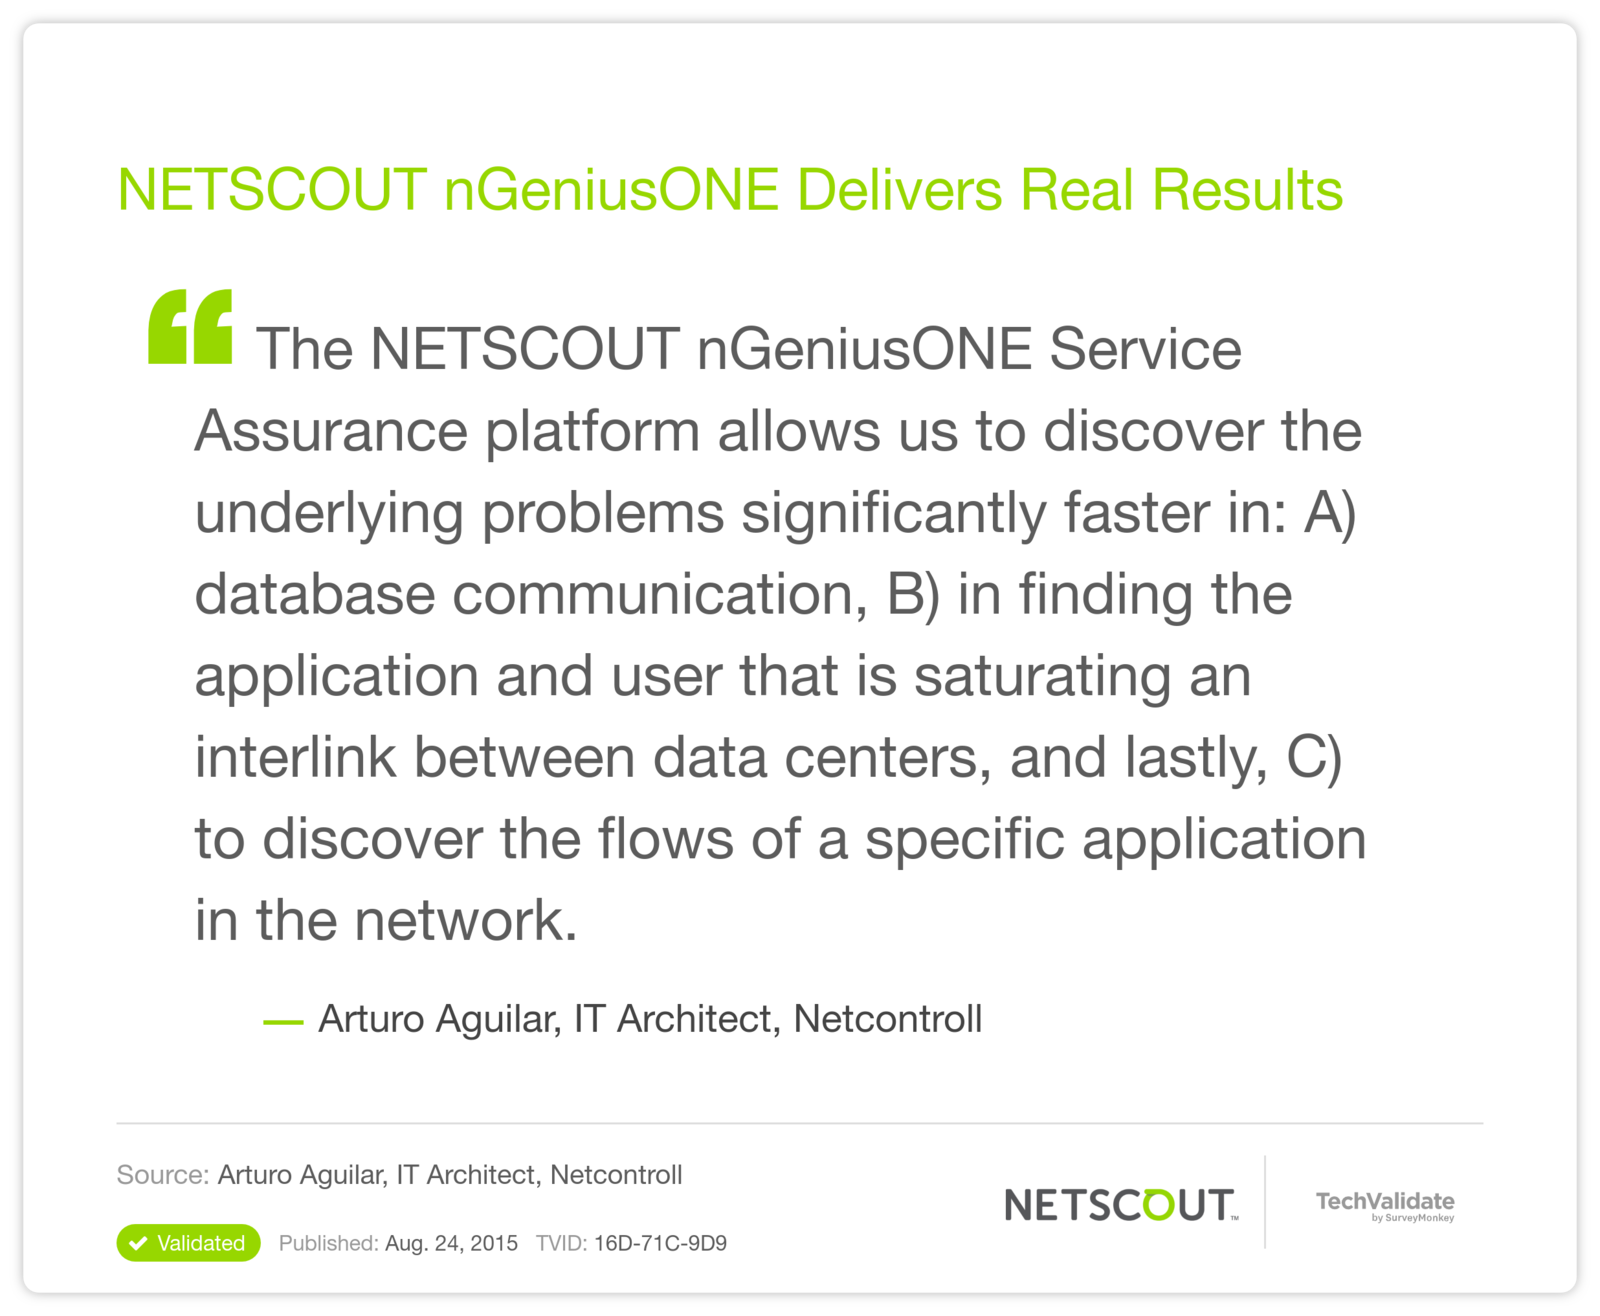 NETSCOUT nGeniusONE Delivers Real Results